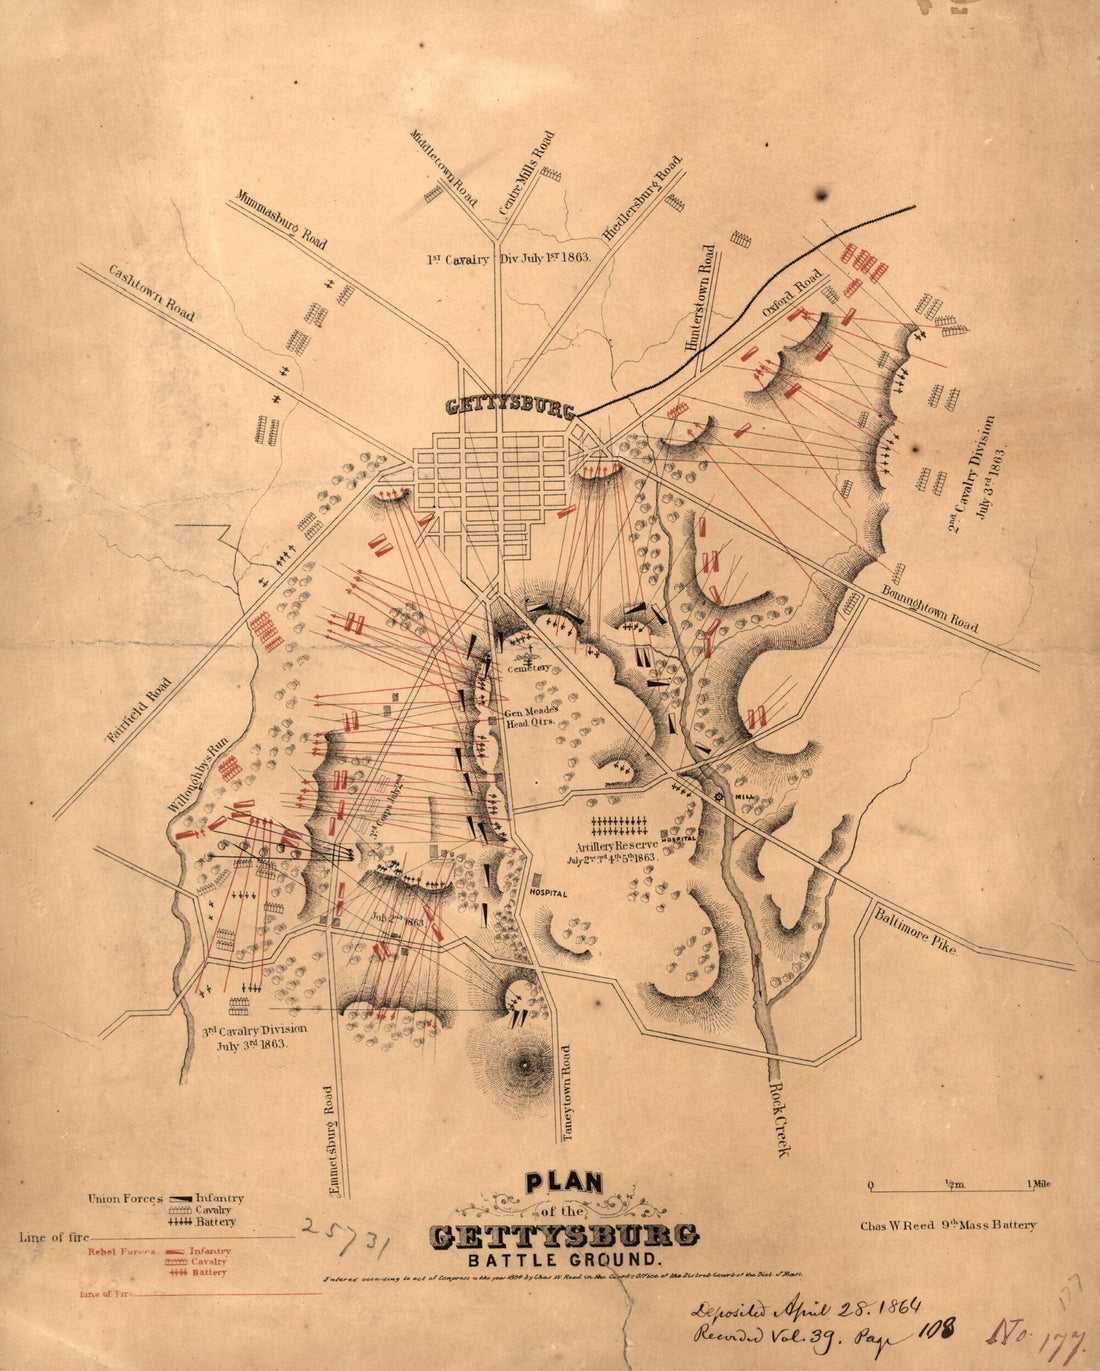 This old map of Plan of the Gettysburg Battle Ground from 1863 was created by Charles Wellington Reed in 1863